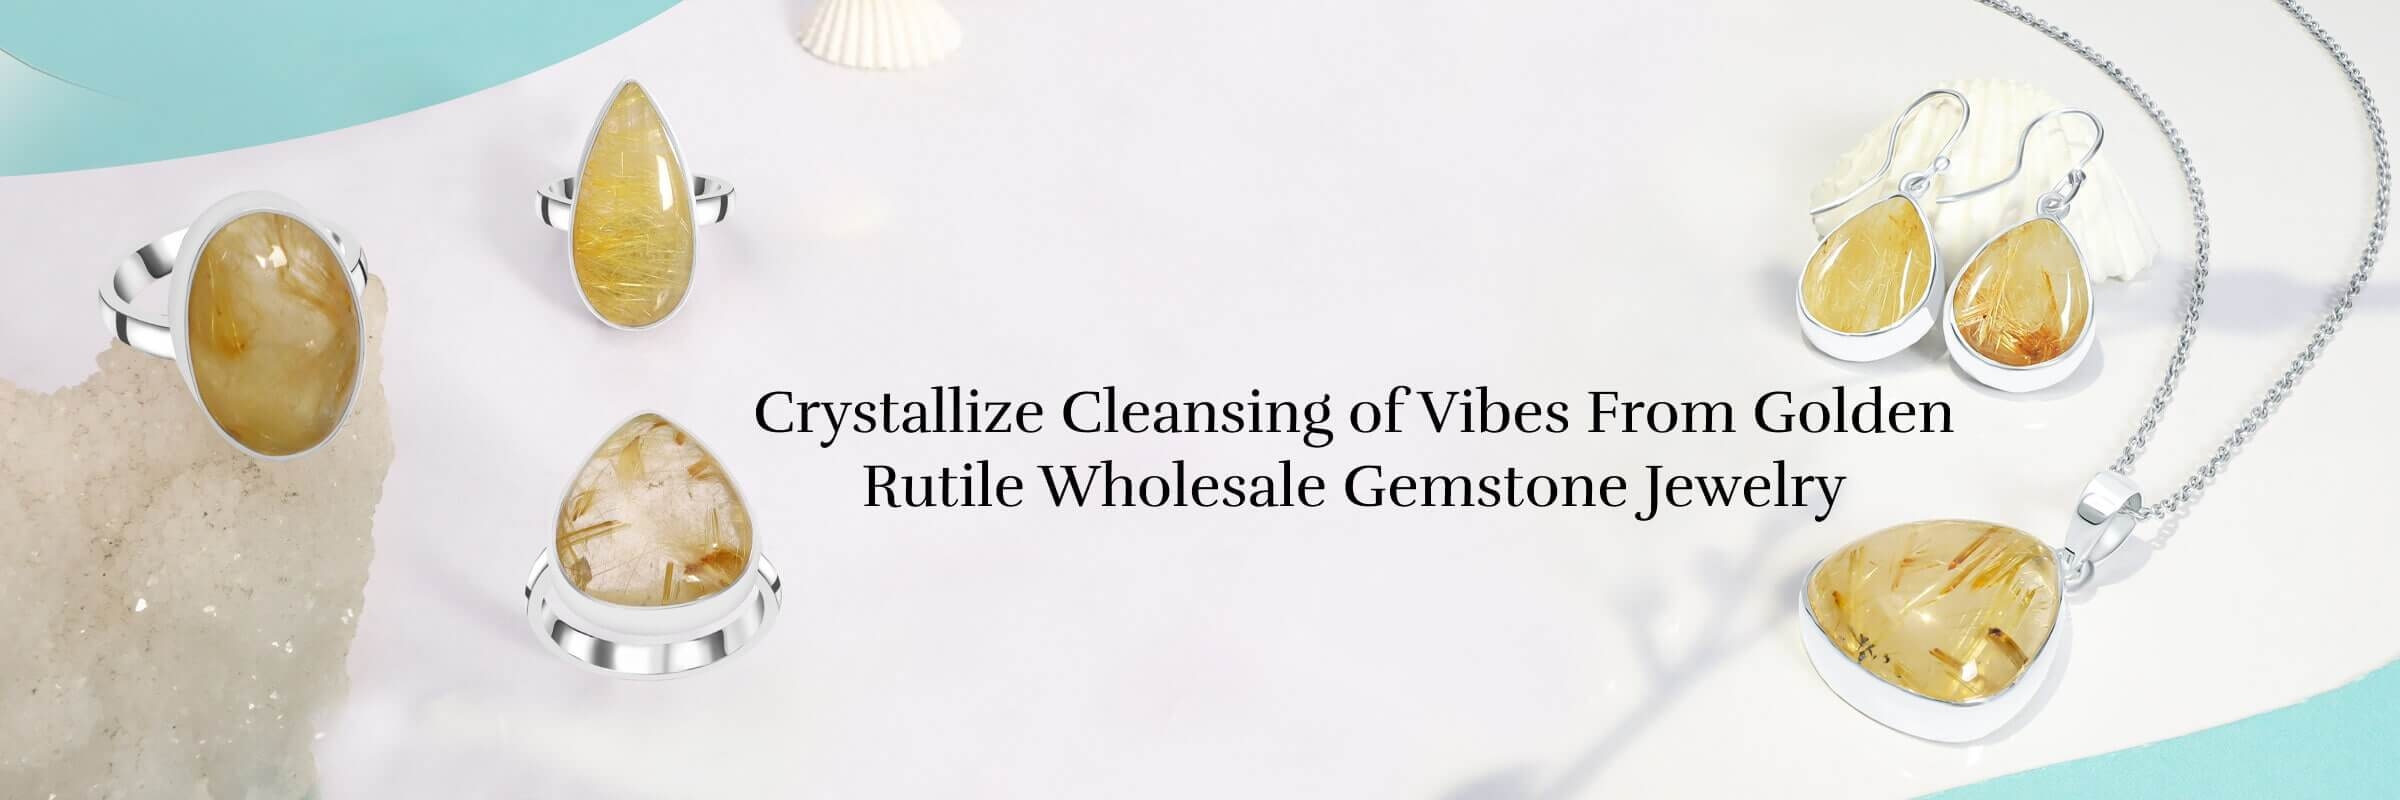 Purify Your Aura with Golden Rutile Wholesale Gemstone Jewelry